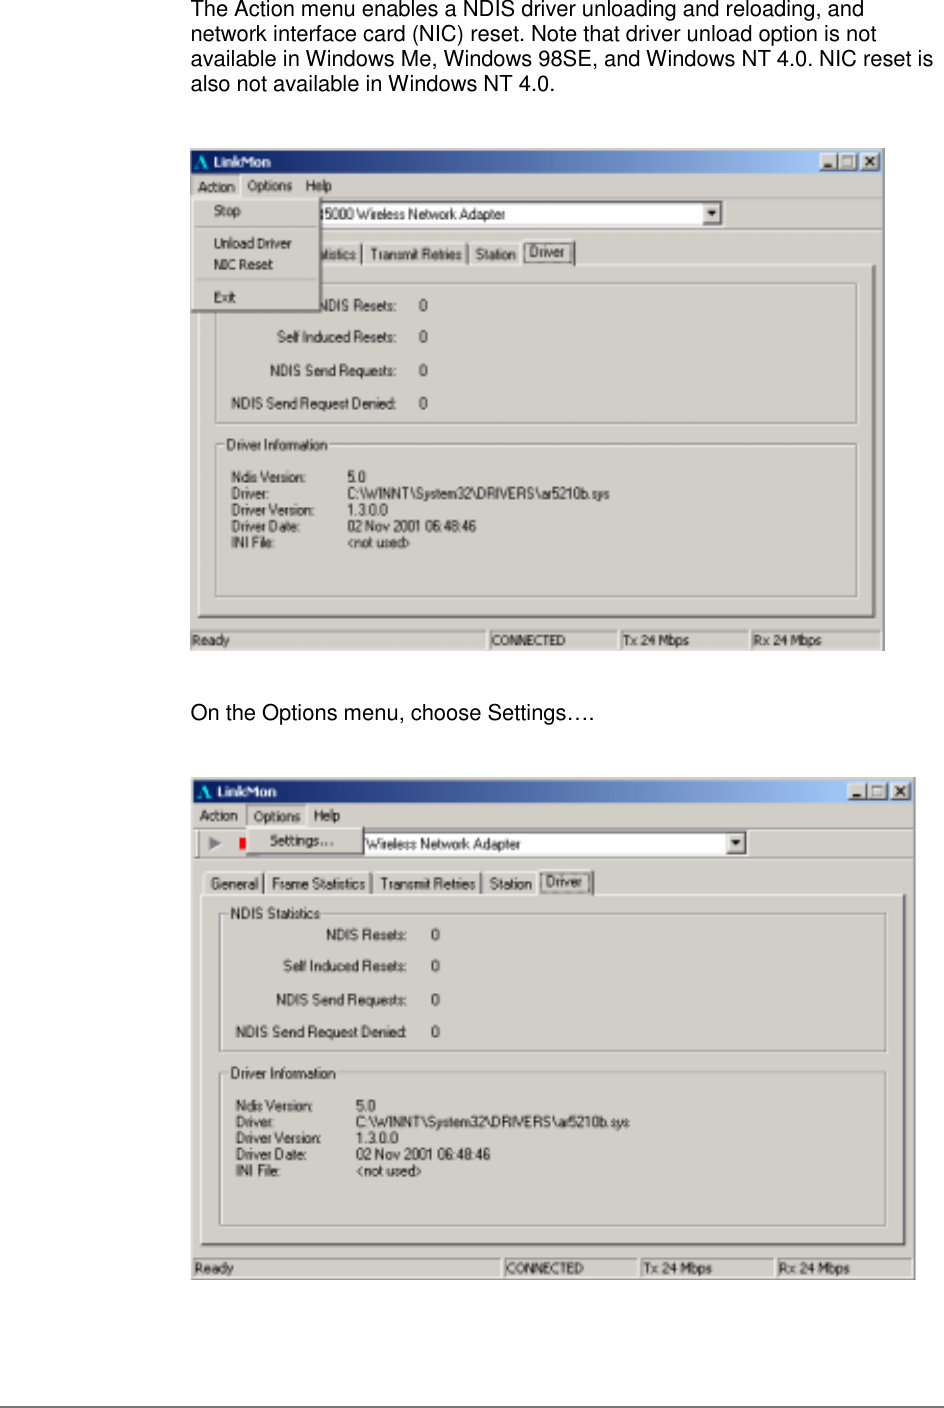 The Action menu enables a NDIS driver unloading and reloading, andnetwork interface card (NIC) reset. Note that driver unload option is notavailable in Windows Me, Windows 98SE, and Windows NT 4.0. NIC reset isalso not available in Windows NT 4.0.On the Options menu, choose Settings….